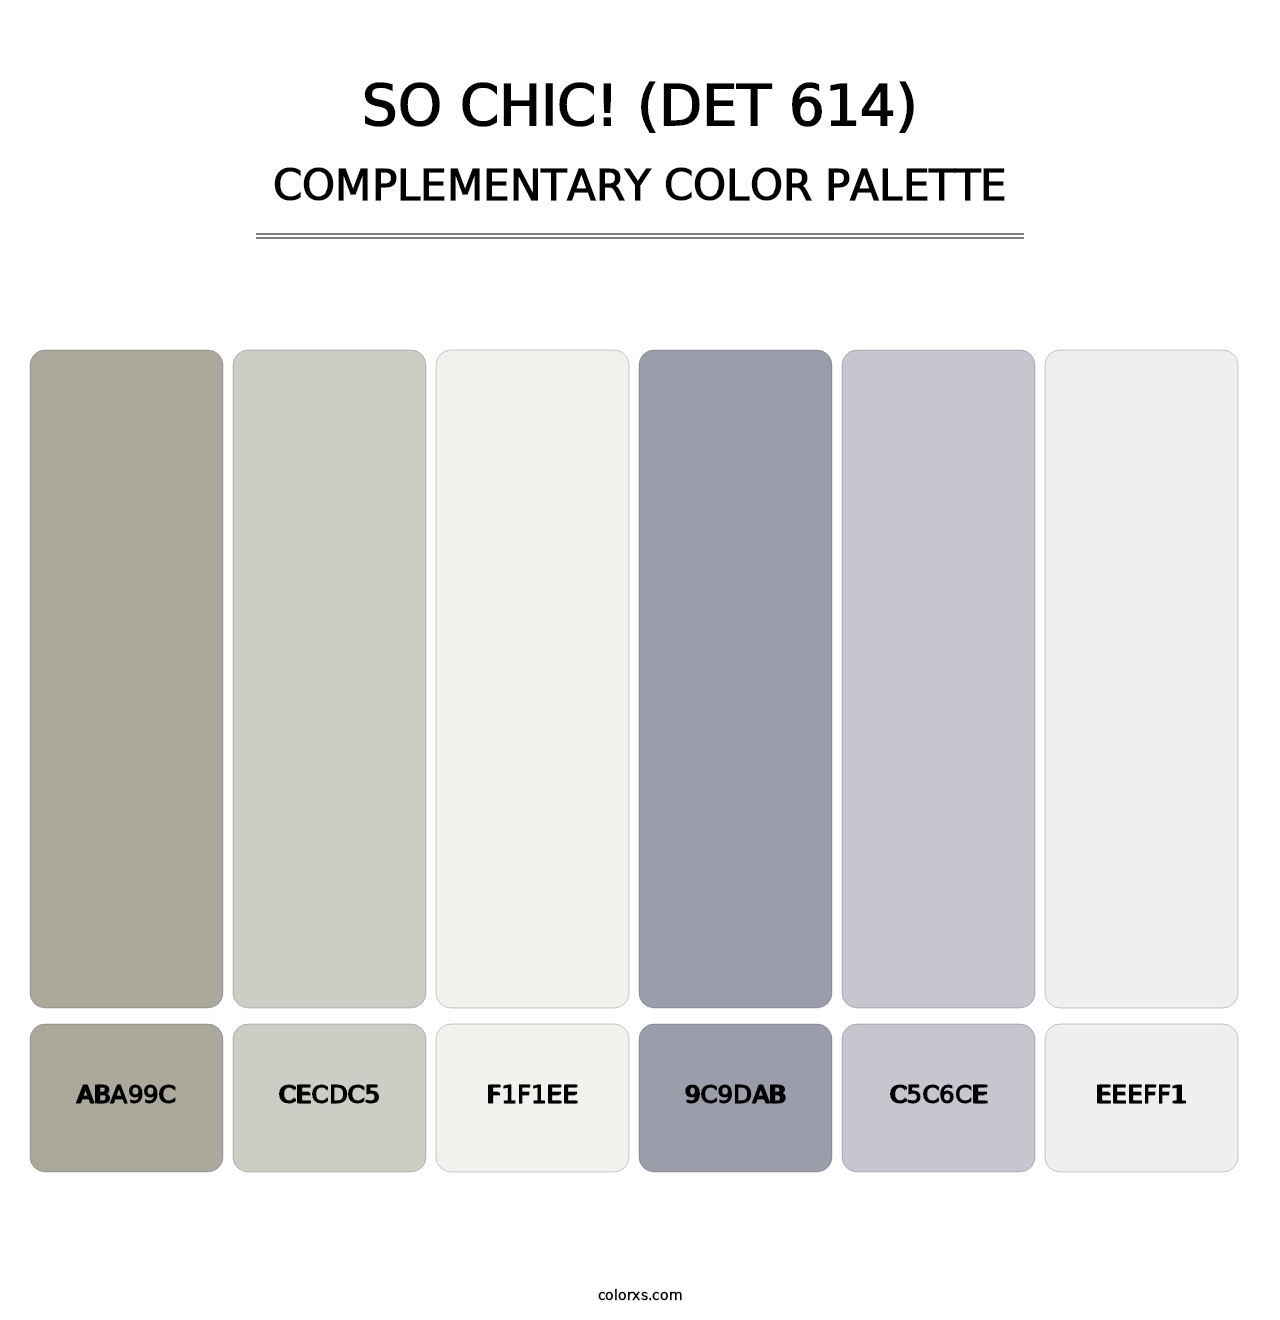 So Chic! (DET 614) - Complementary Color Palette